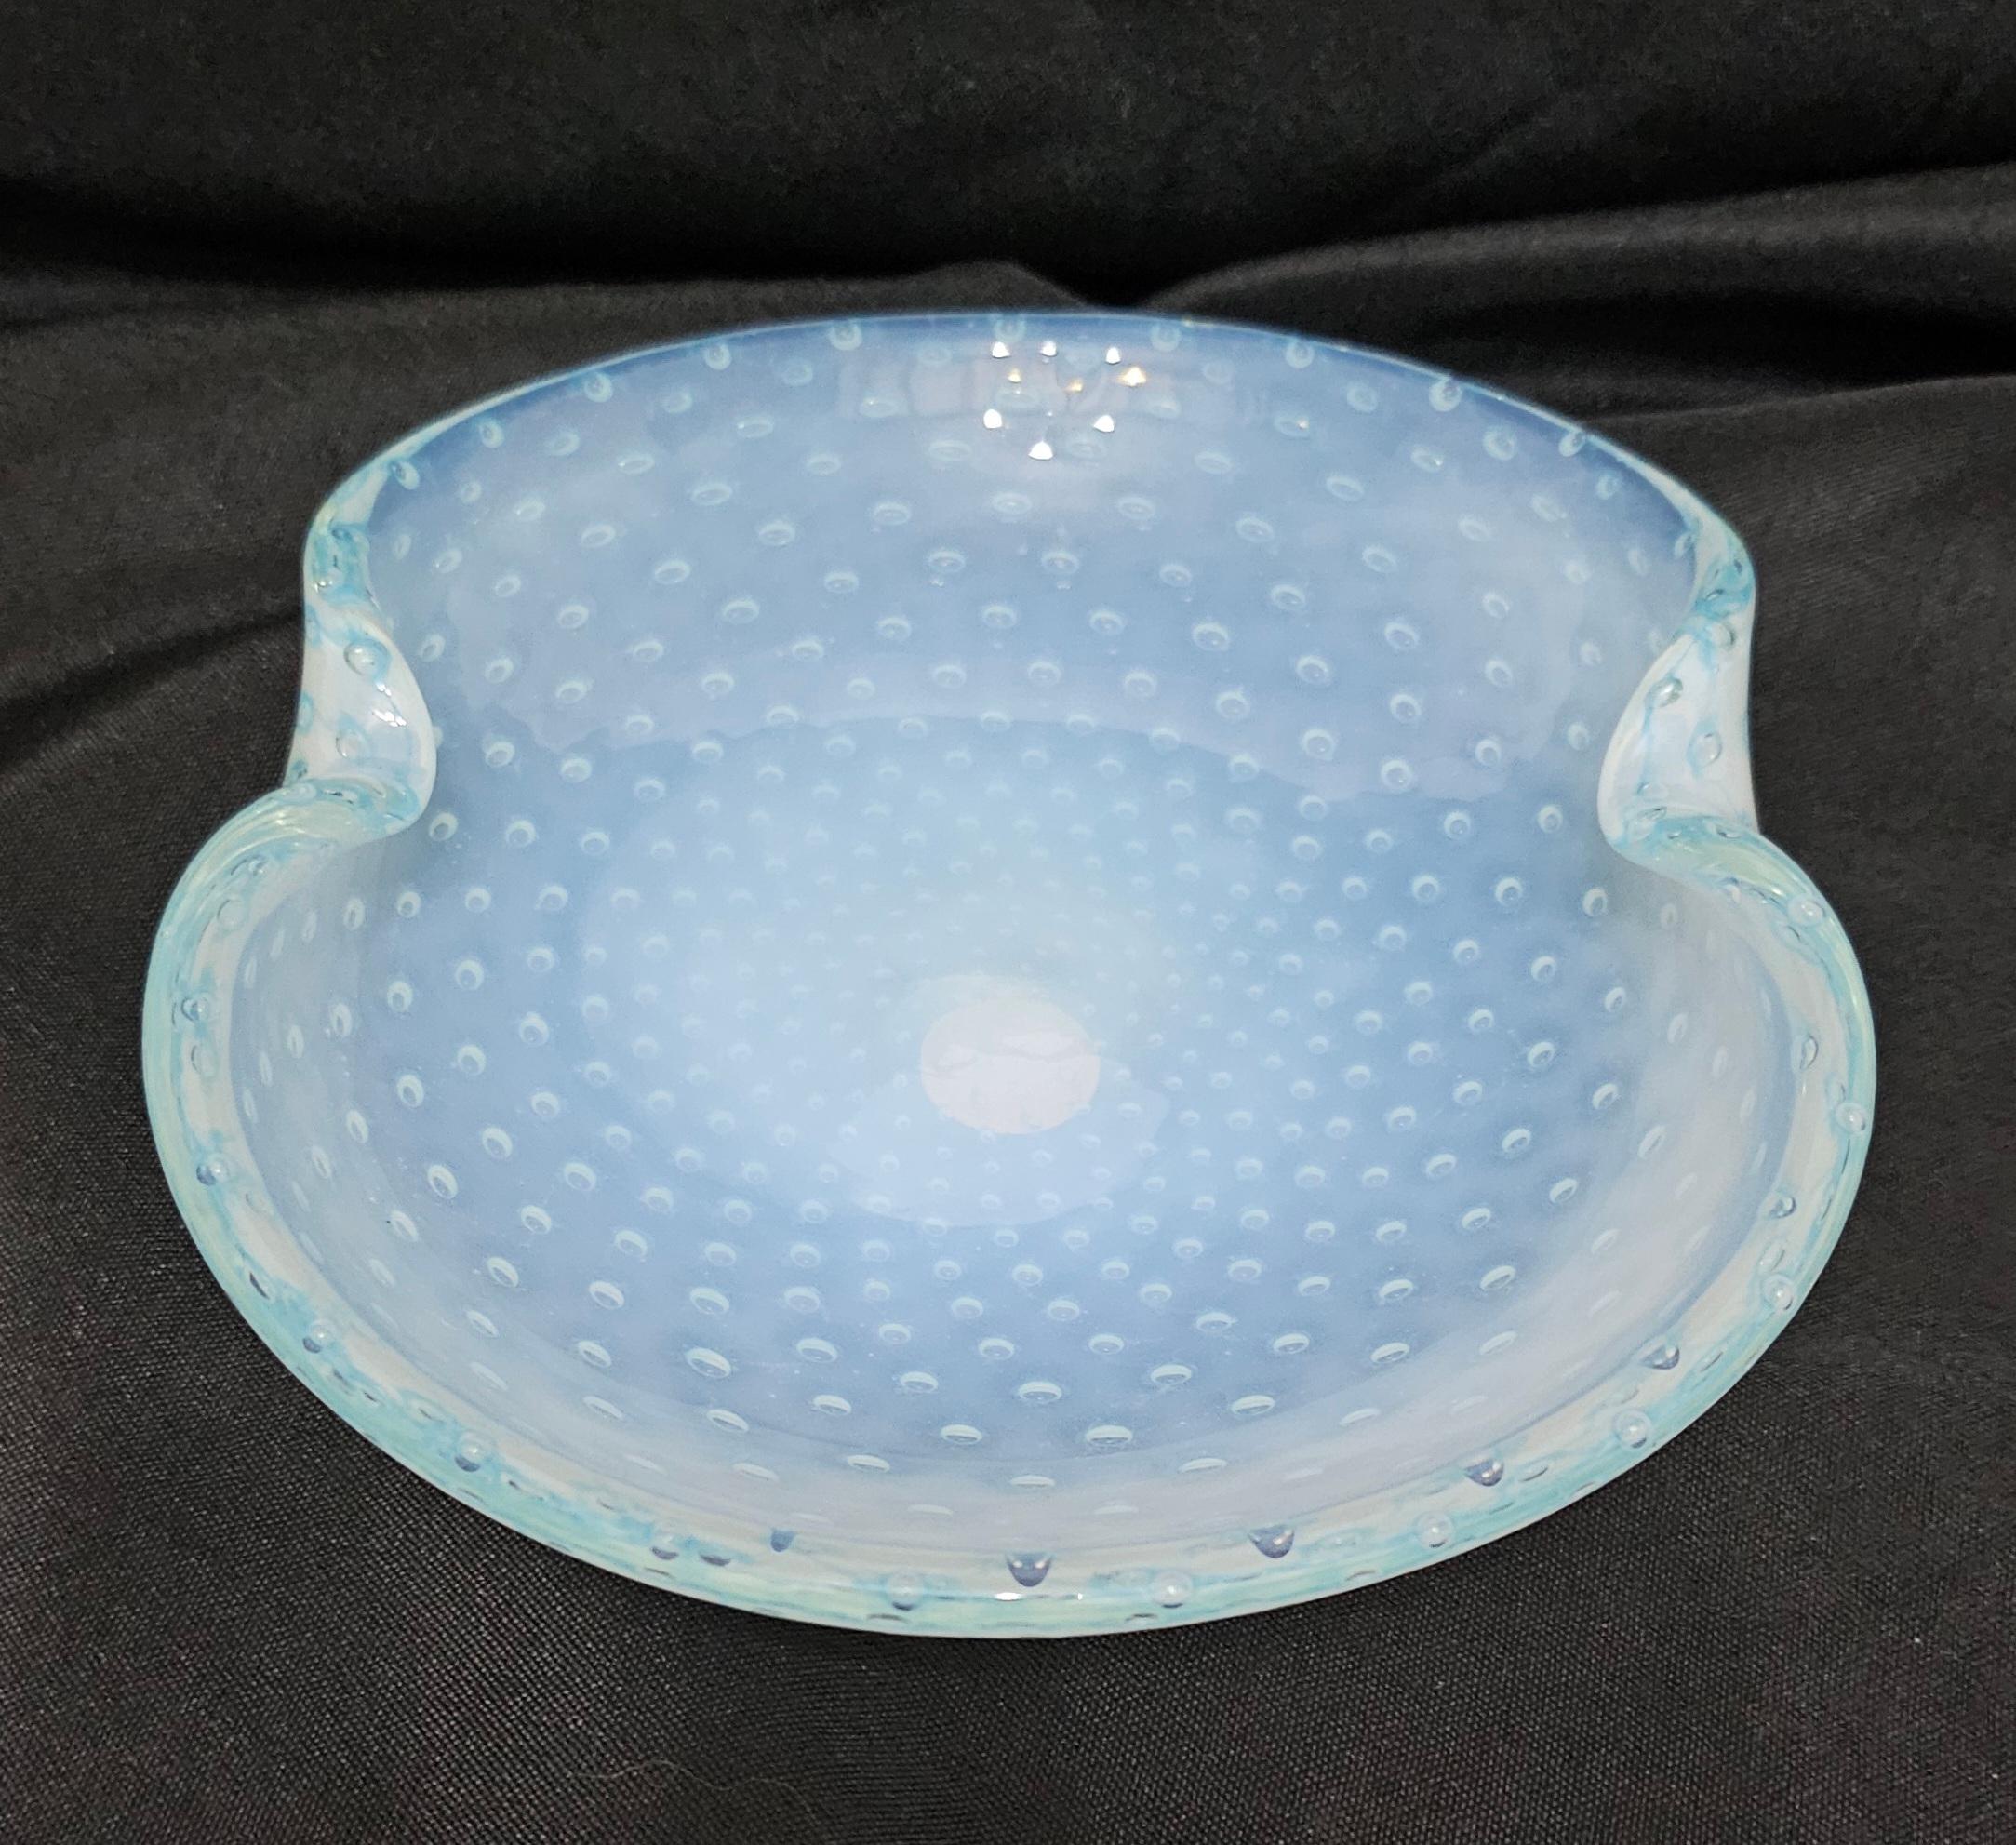 Fratelli Toso Murano Glass Bullicante Decorative Dish, Opaline. Original Label

Measures about 6.5 x 5.5 x 1.5 inches.
This appears to be an opaline type glass, light blue in white.
On a light background the colors will look lighter.
Good vintage